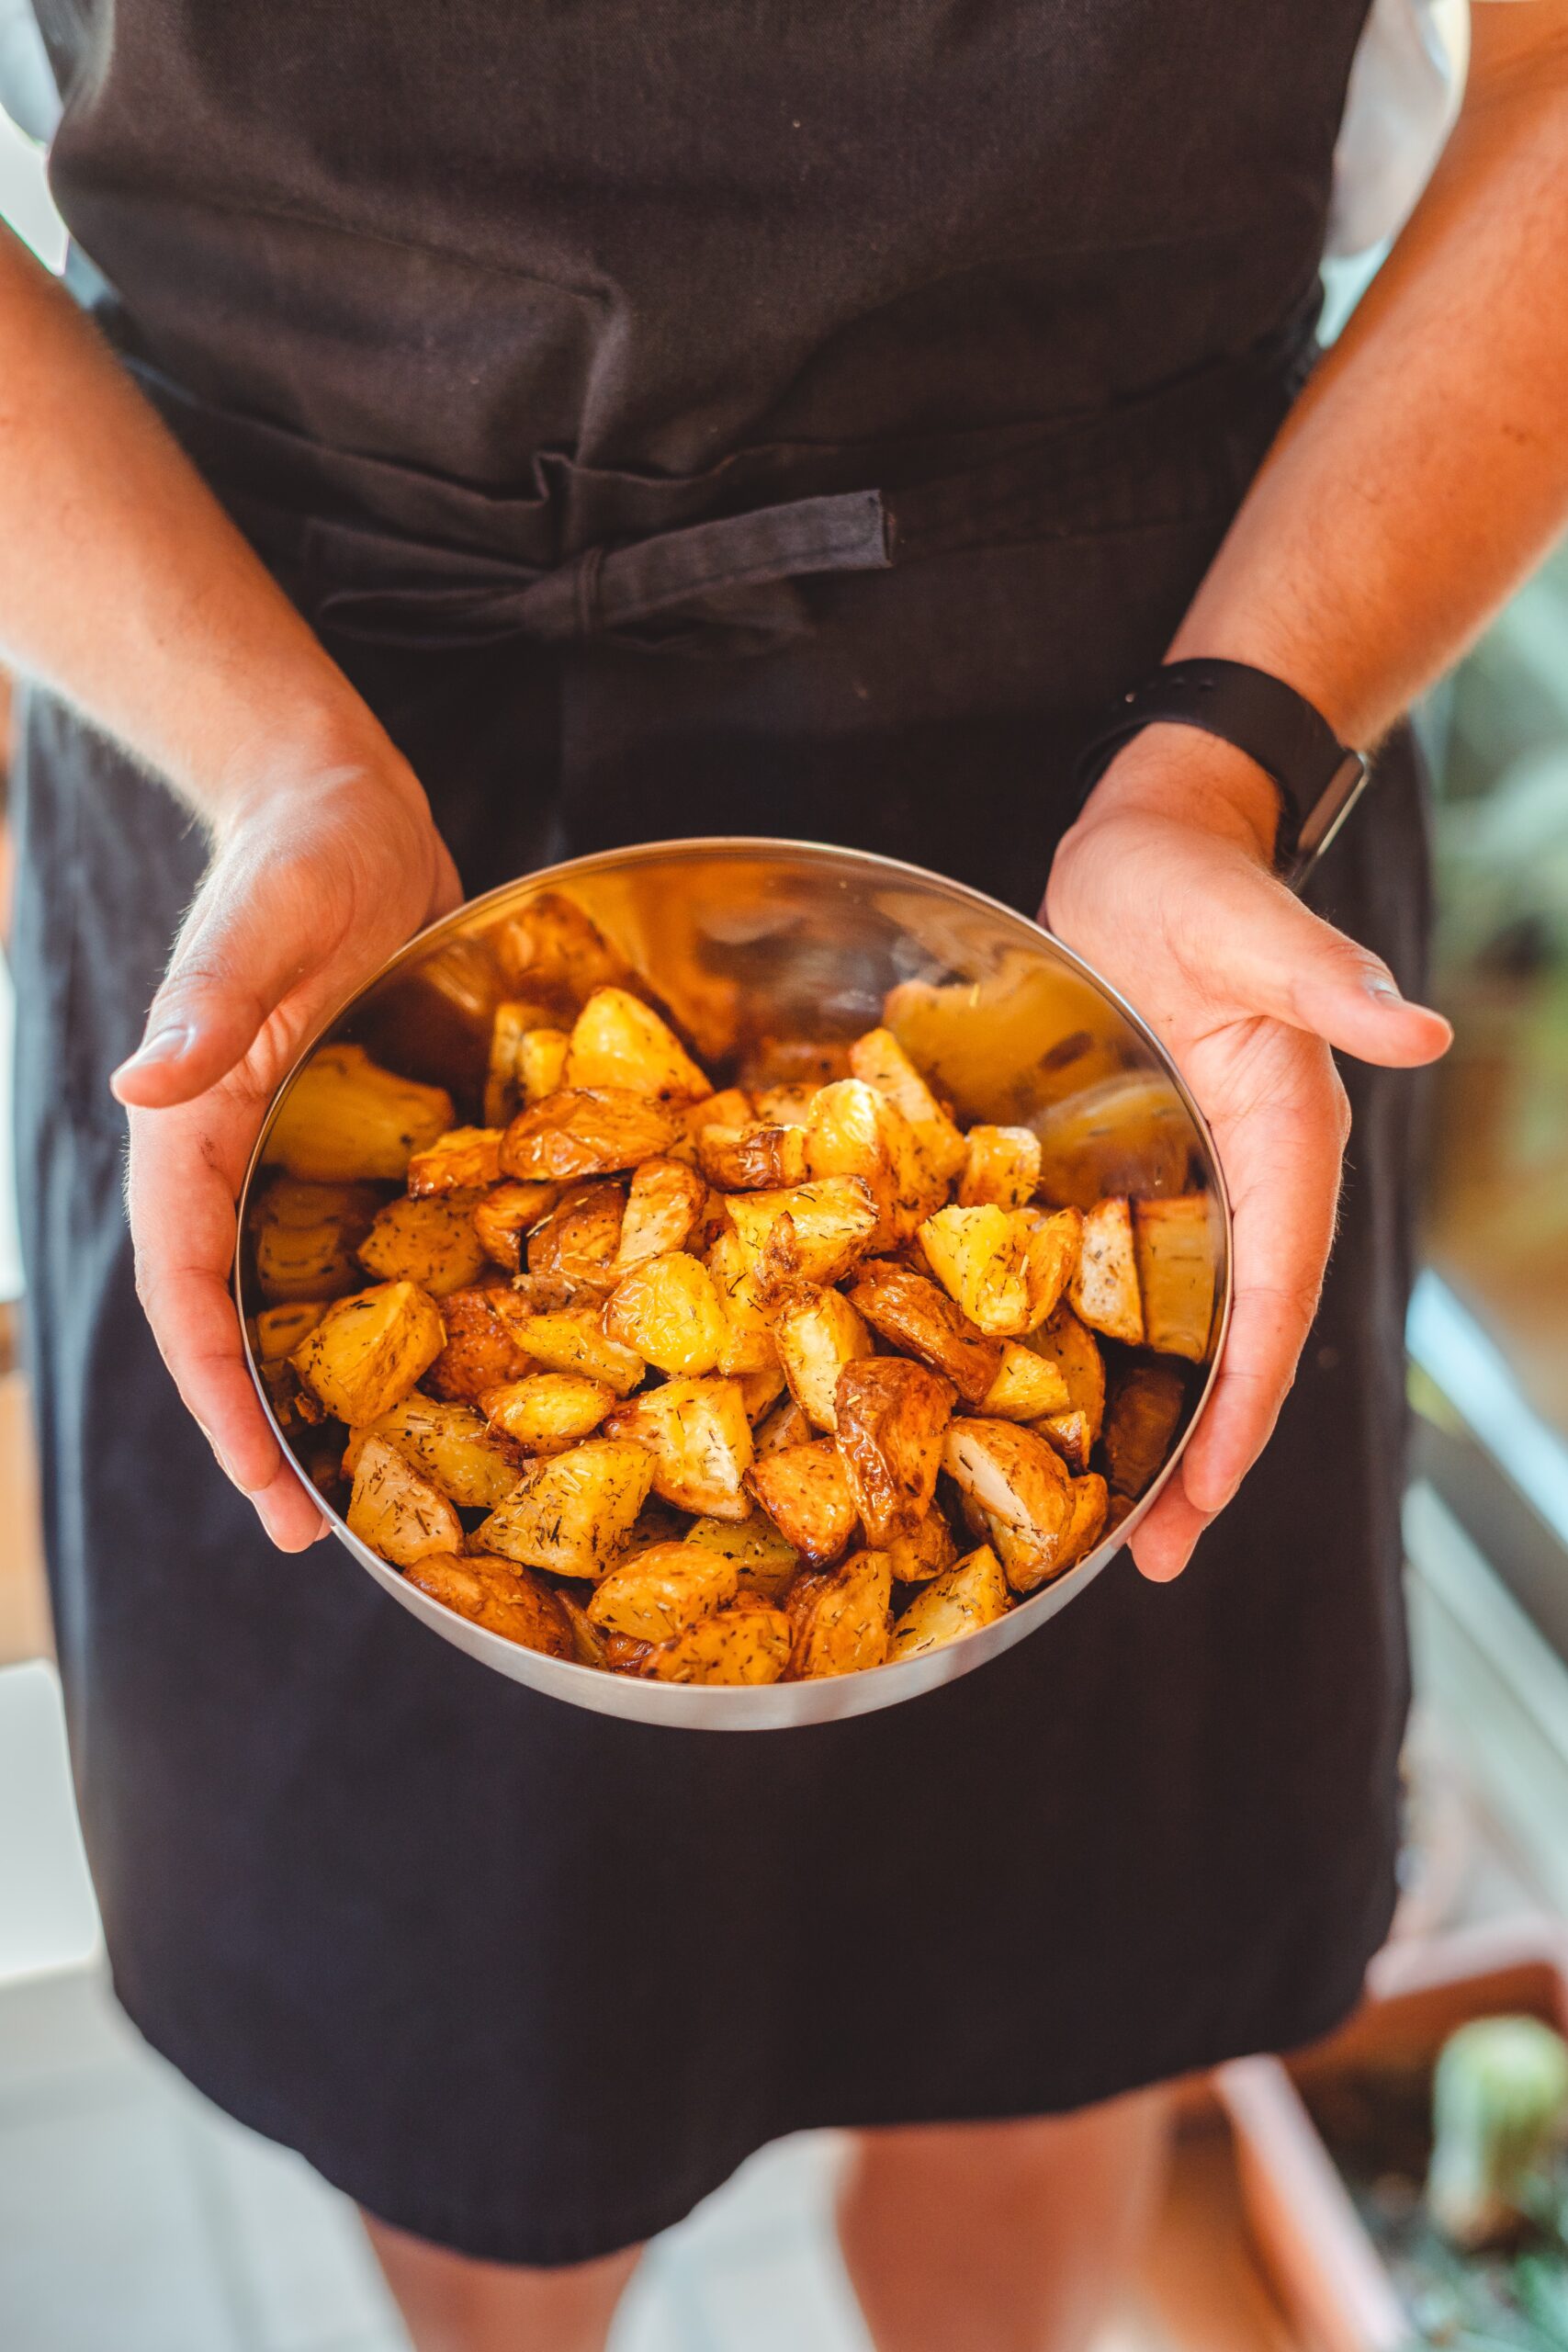 quick and easy home fries, home fries, potato fries, home fries recipe